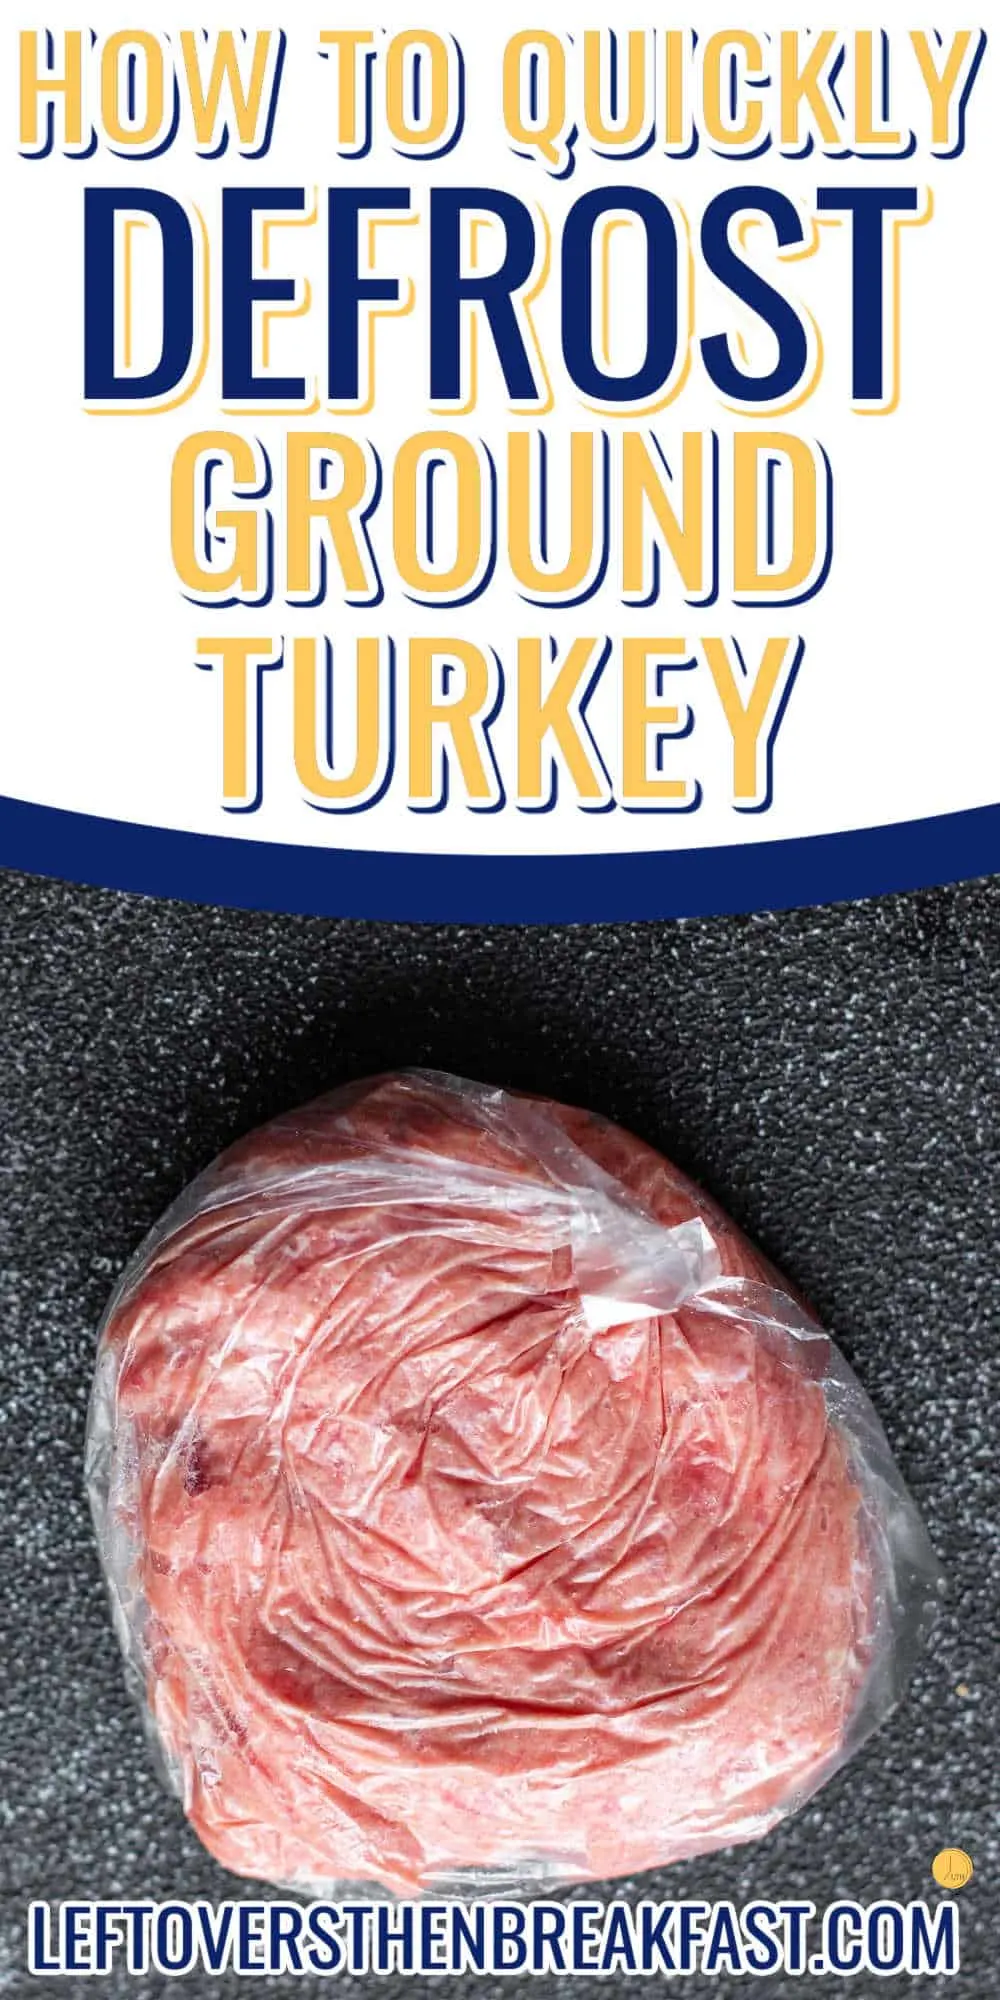 package of ground turkey with text "how to quickly defrost ground turkey"